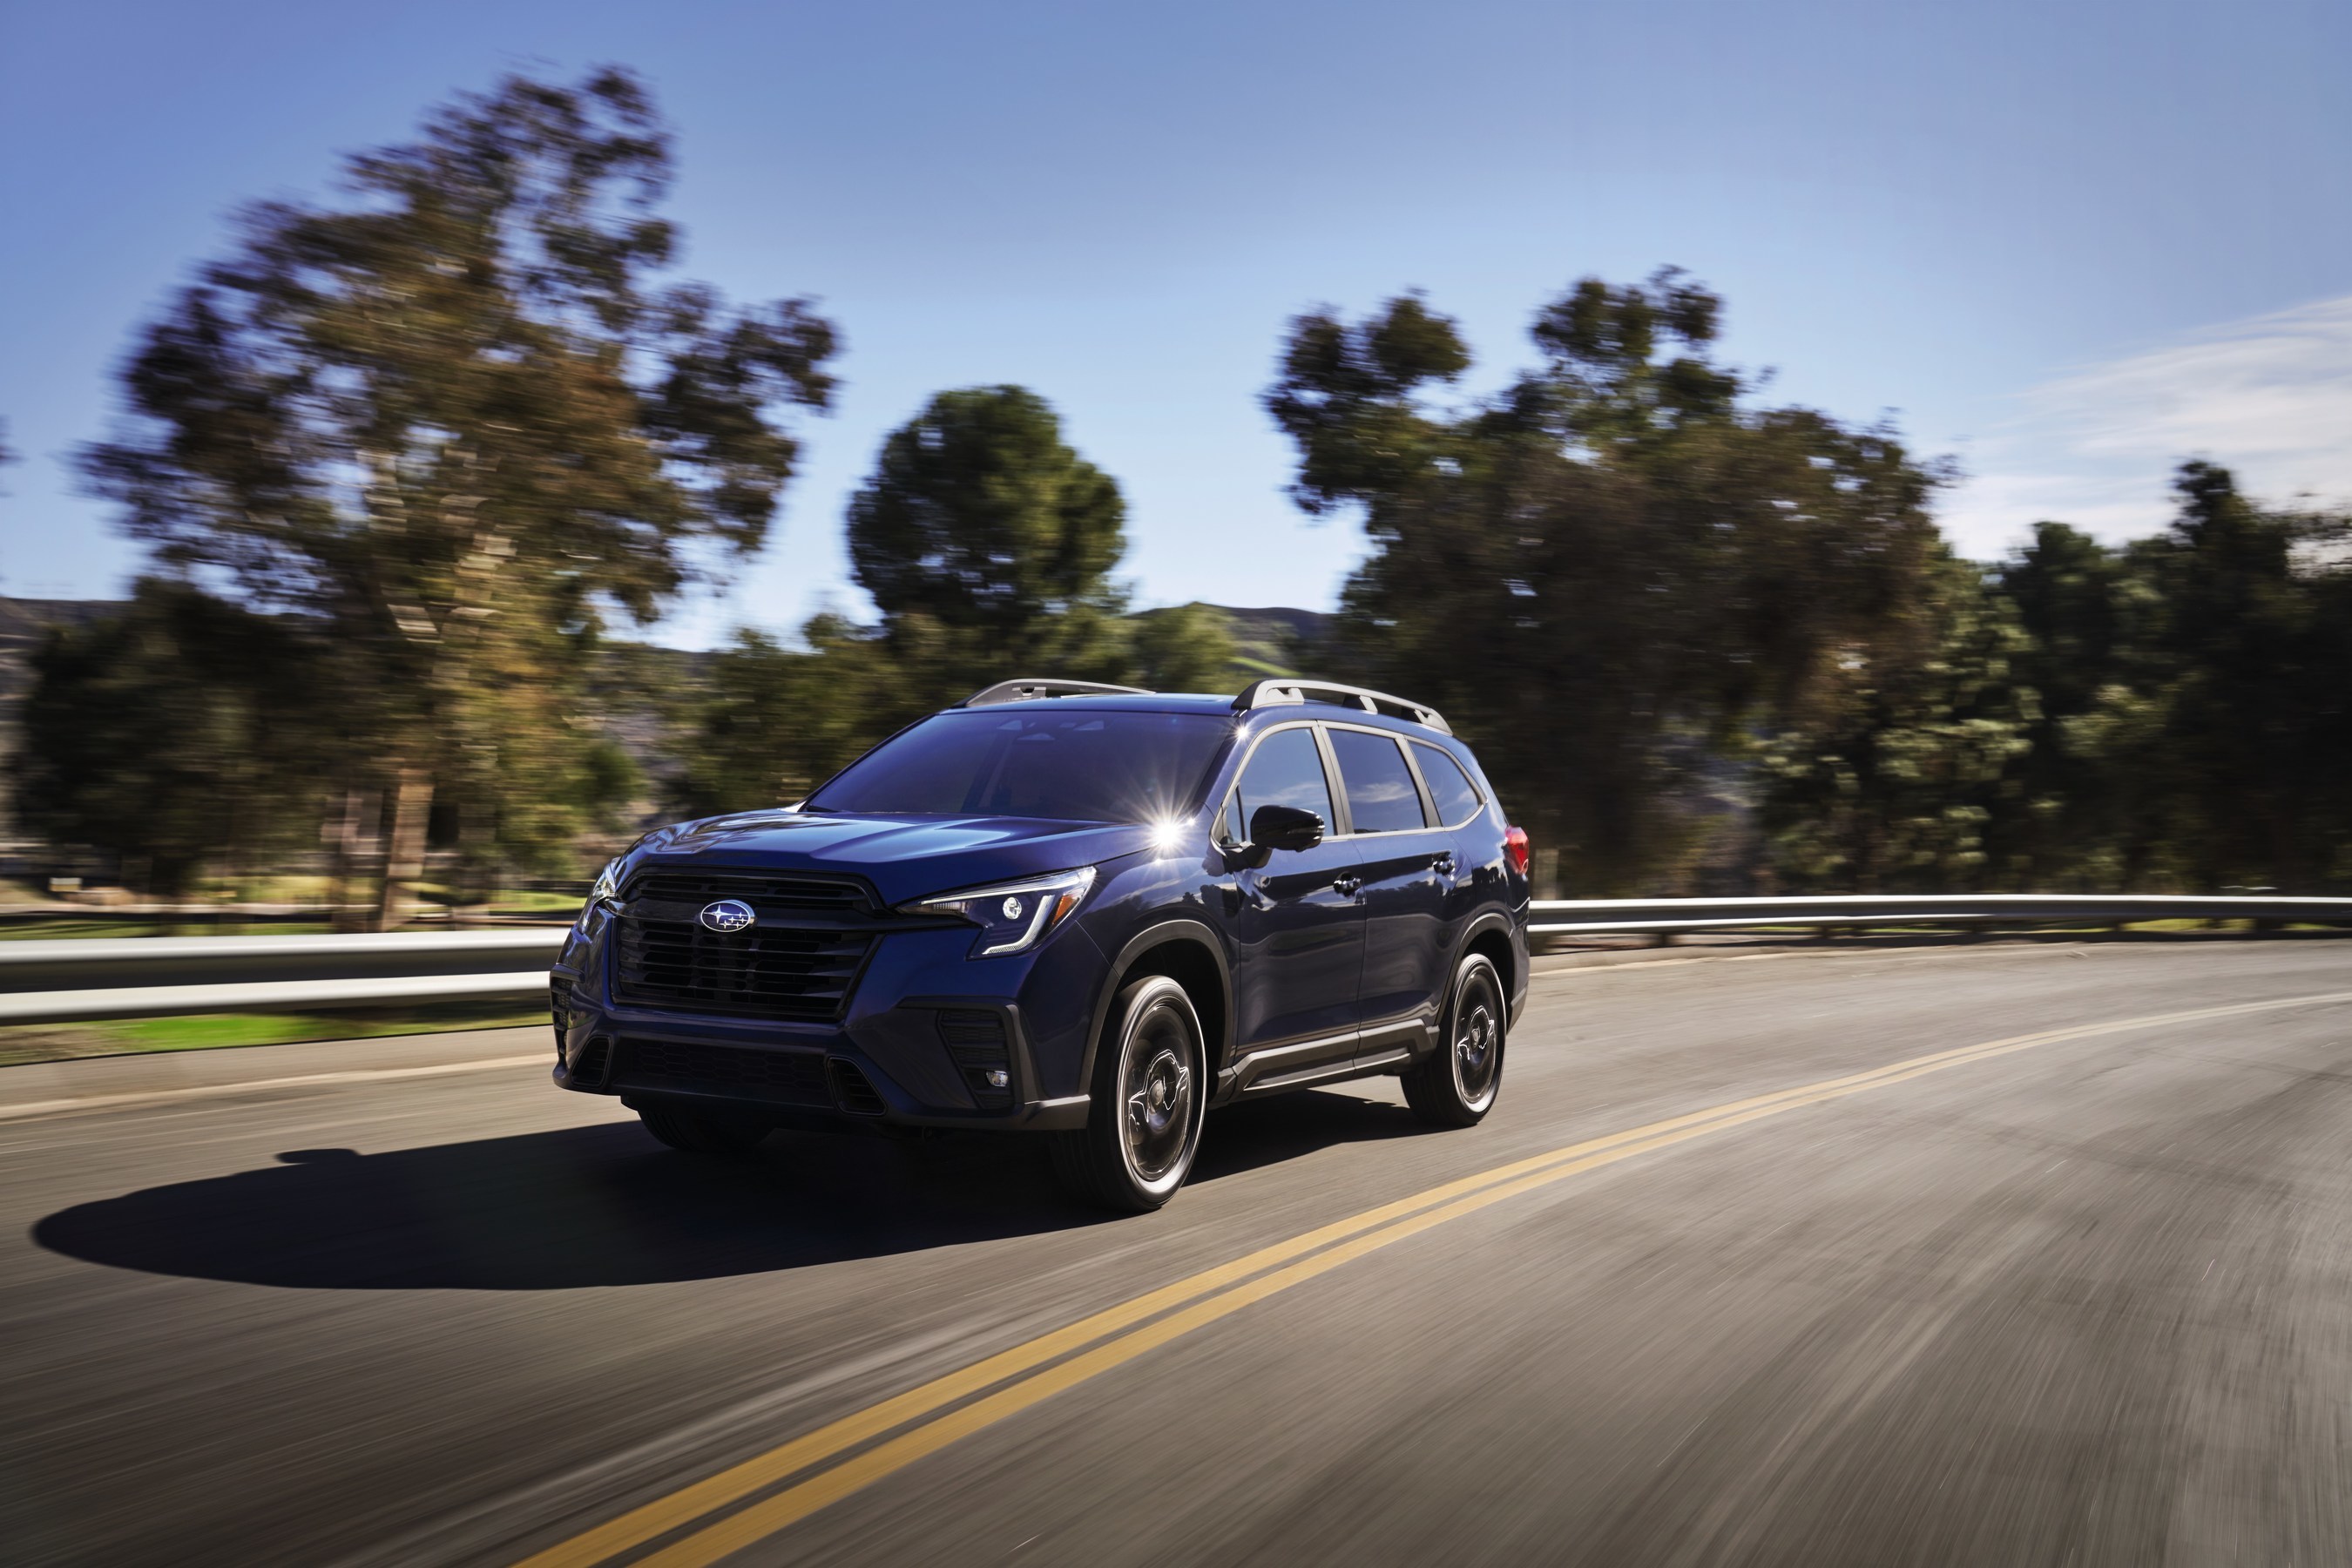 The 2023 Subaru Ascent on the road